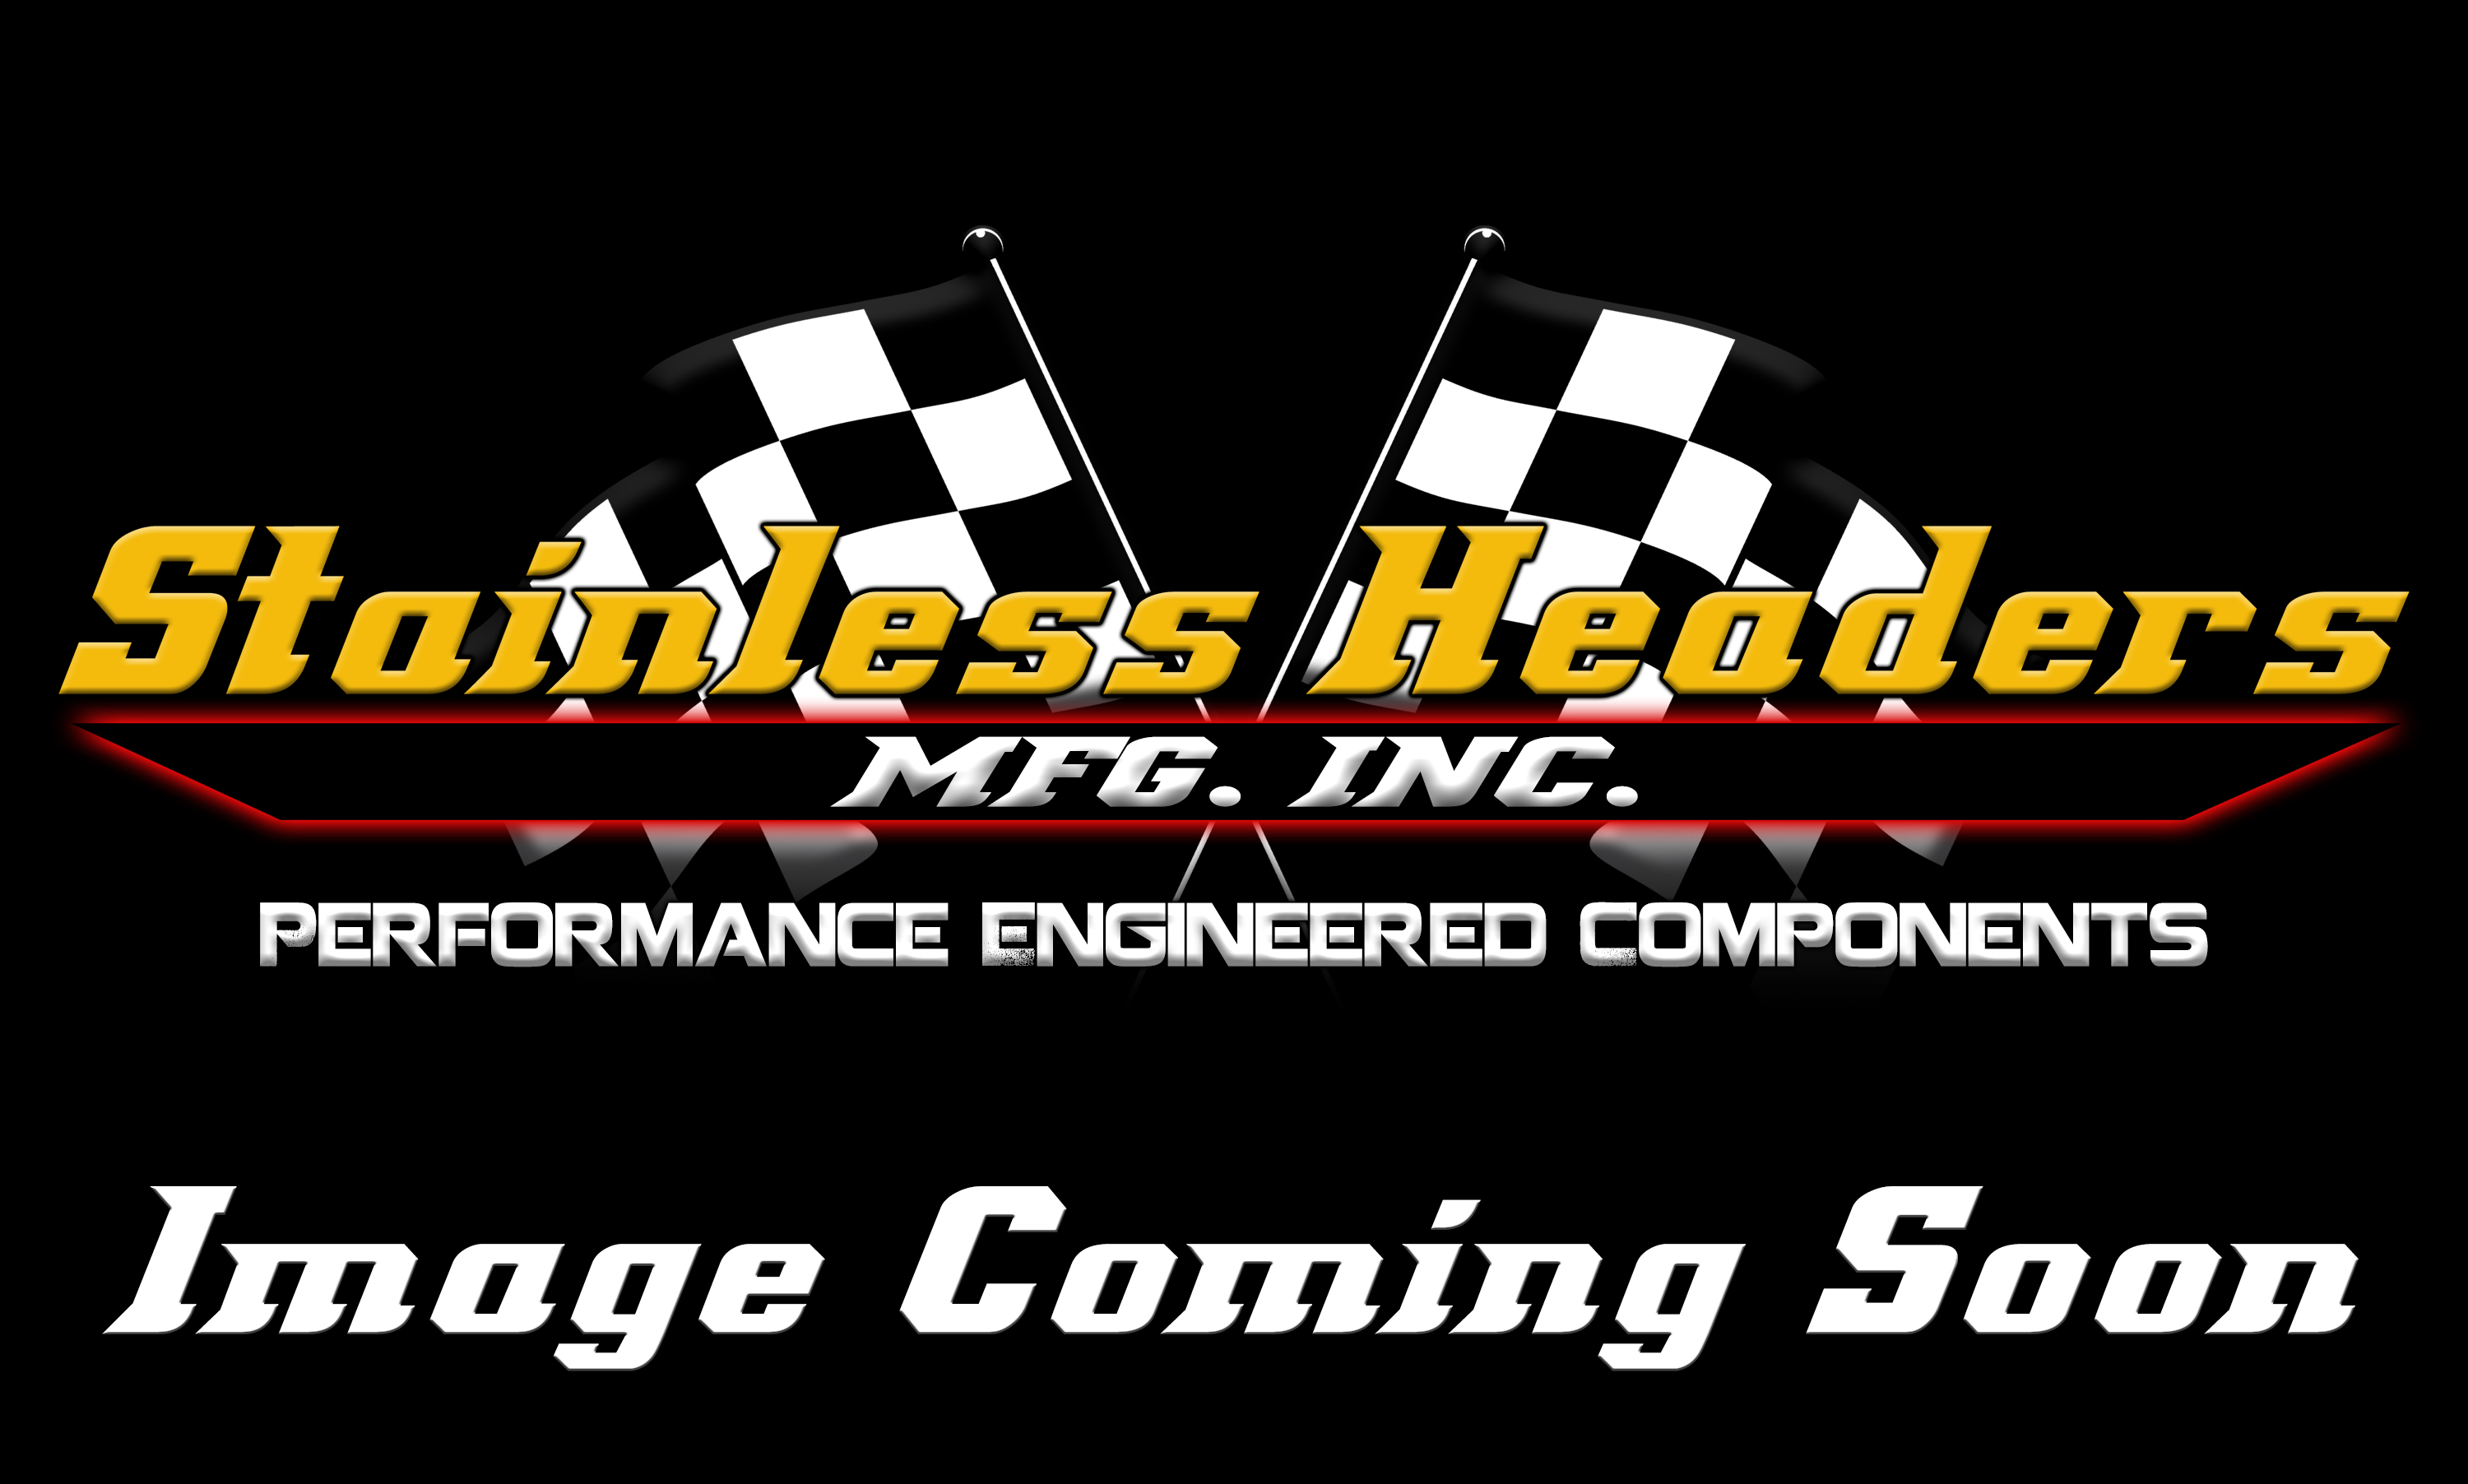 CompTurbo Technologies - CTR4518R-8388 Mid Frame Oil Lubricated 2.0 Turbocharger (1500 HP)